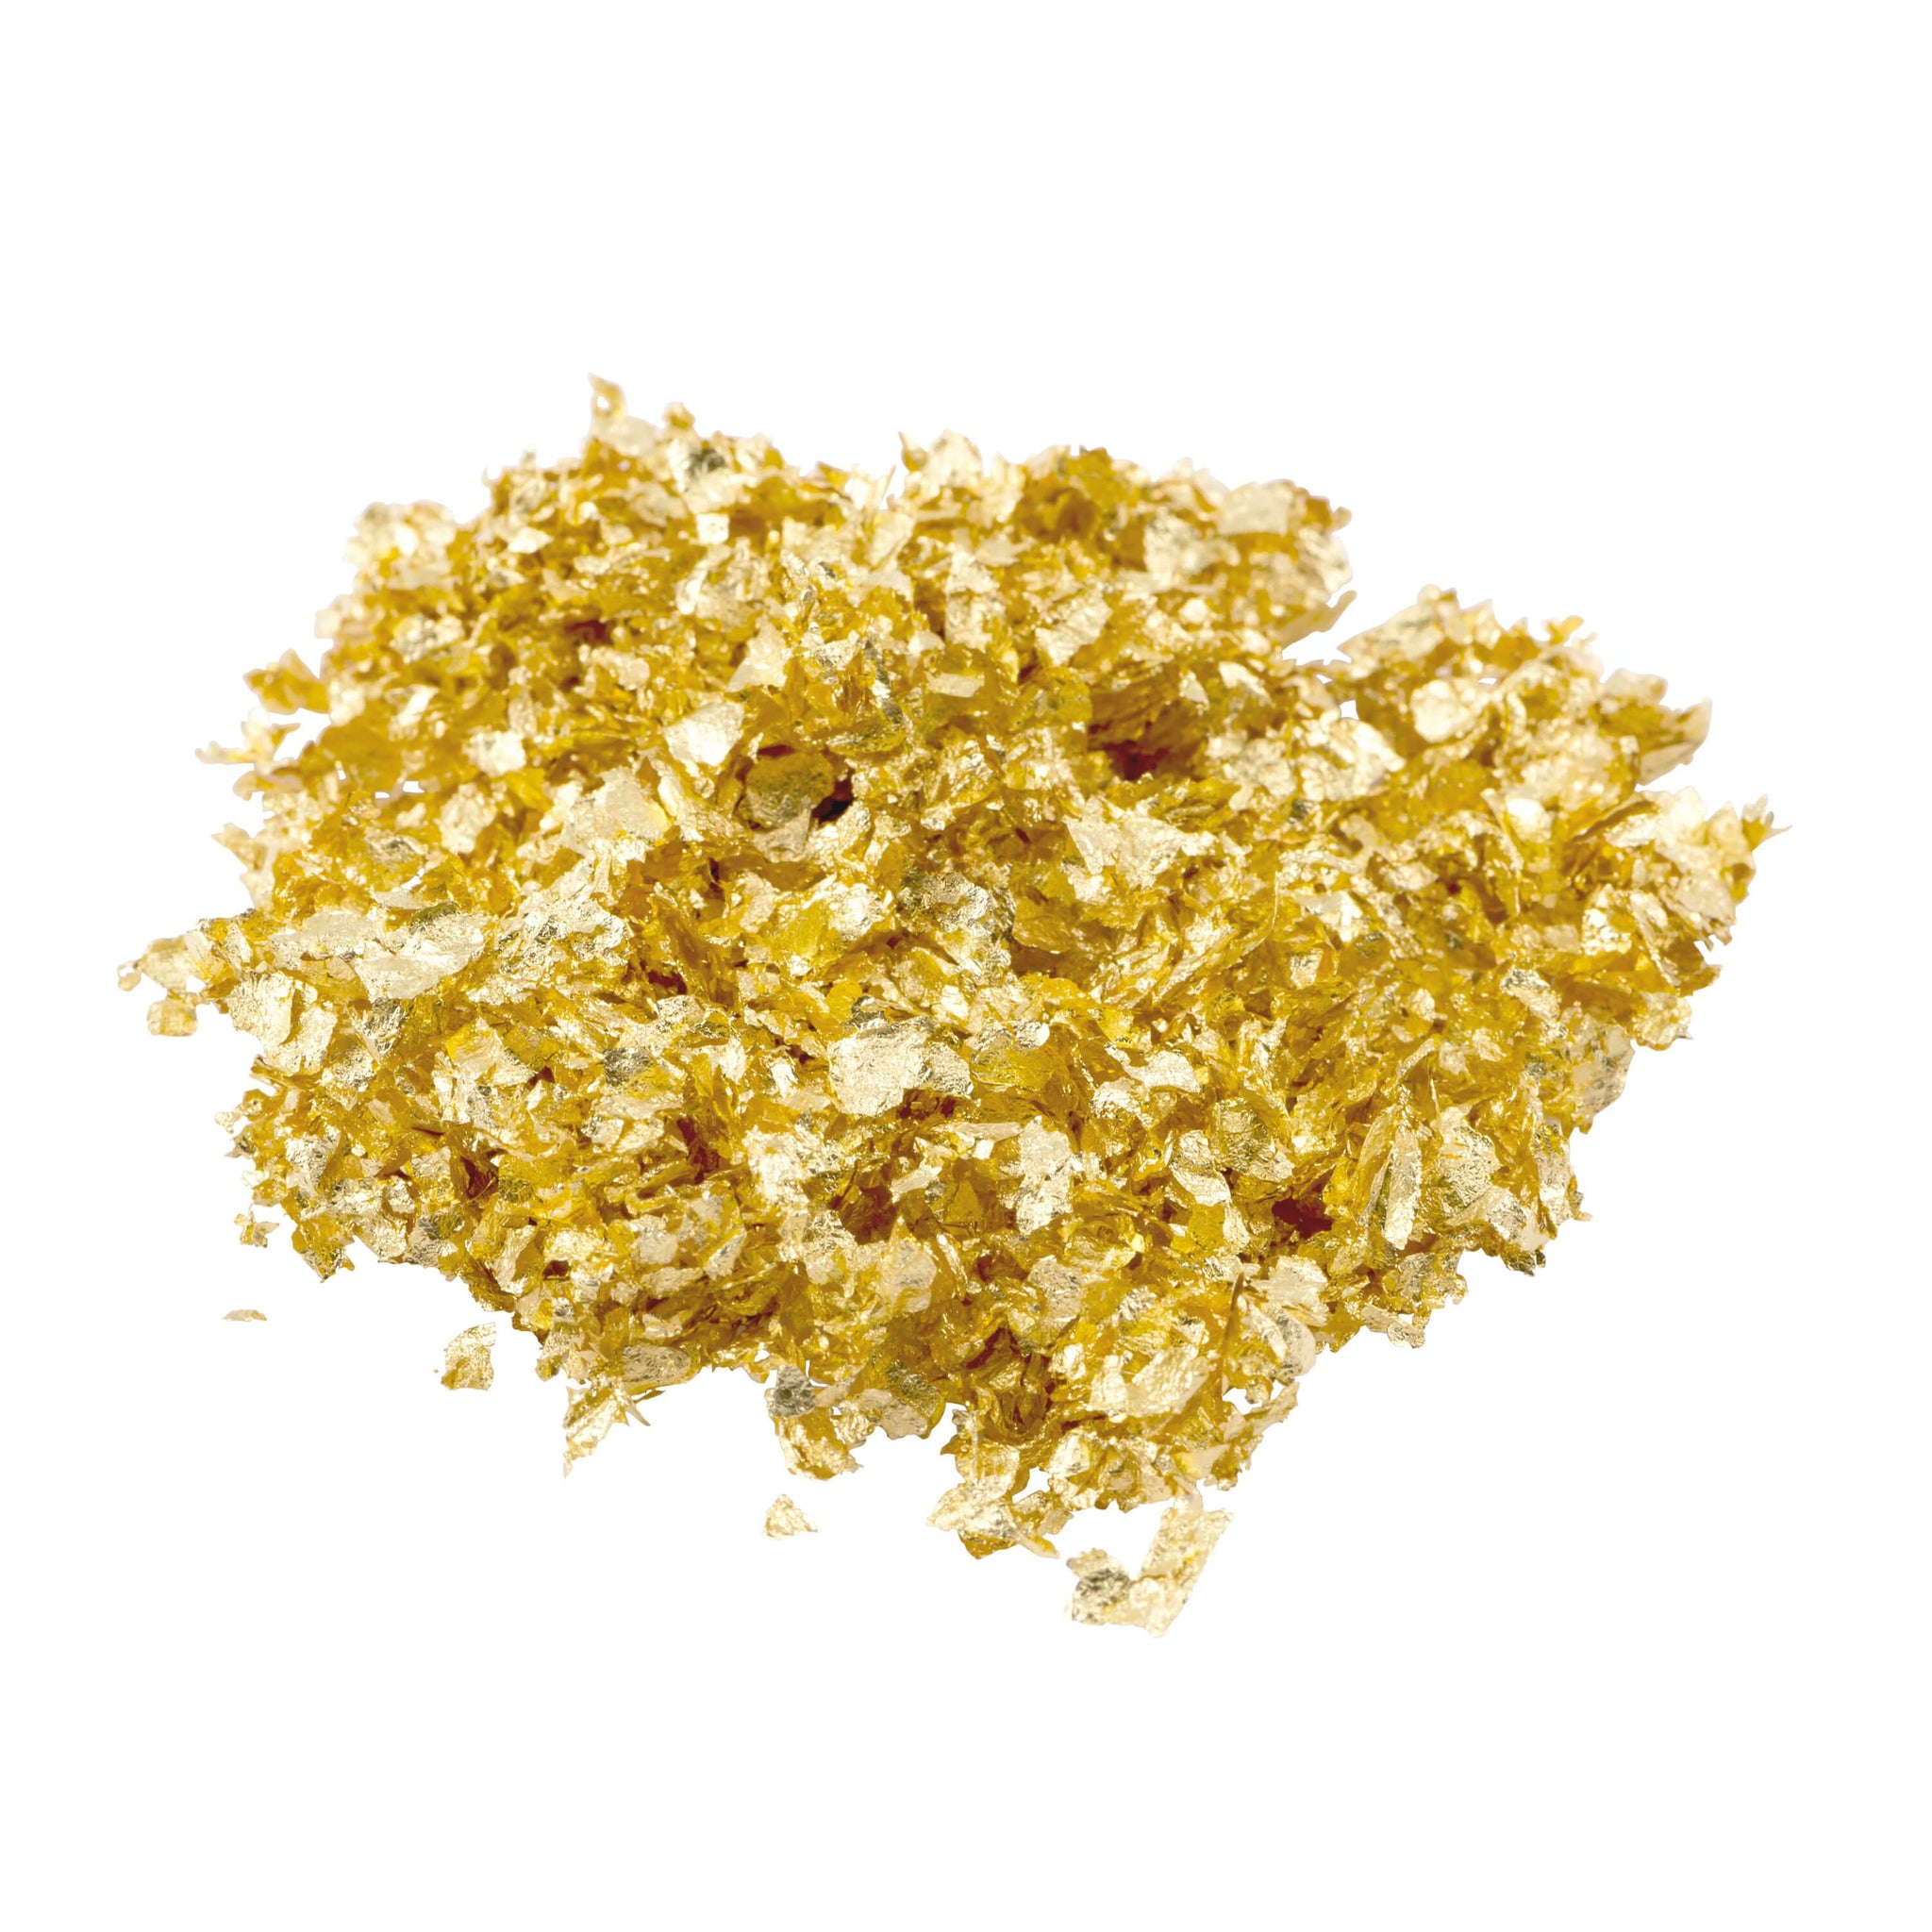  Edible Gold Dust Powder (200mg) / with Shaker